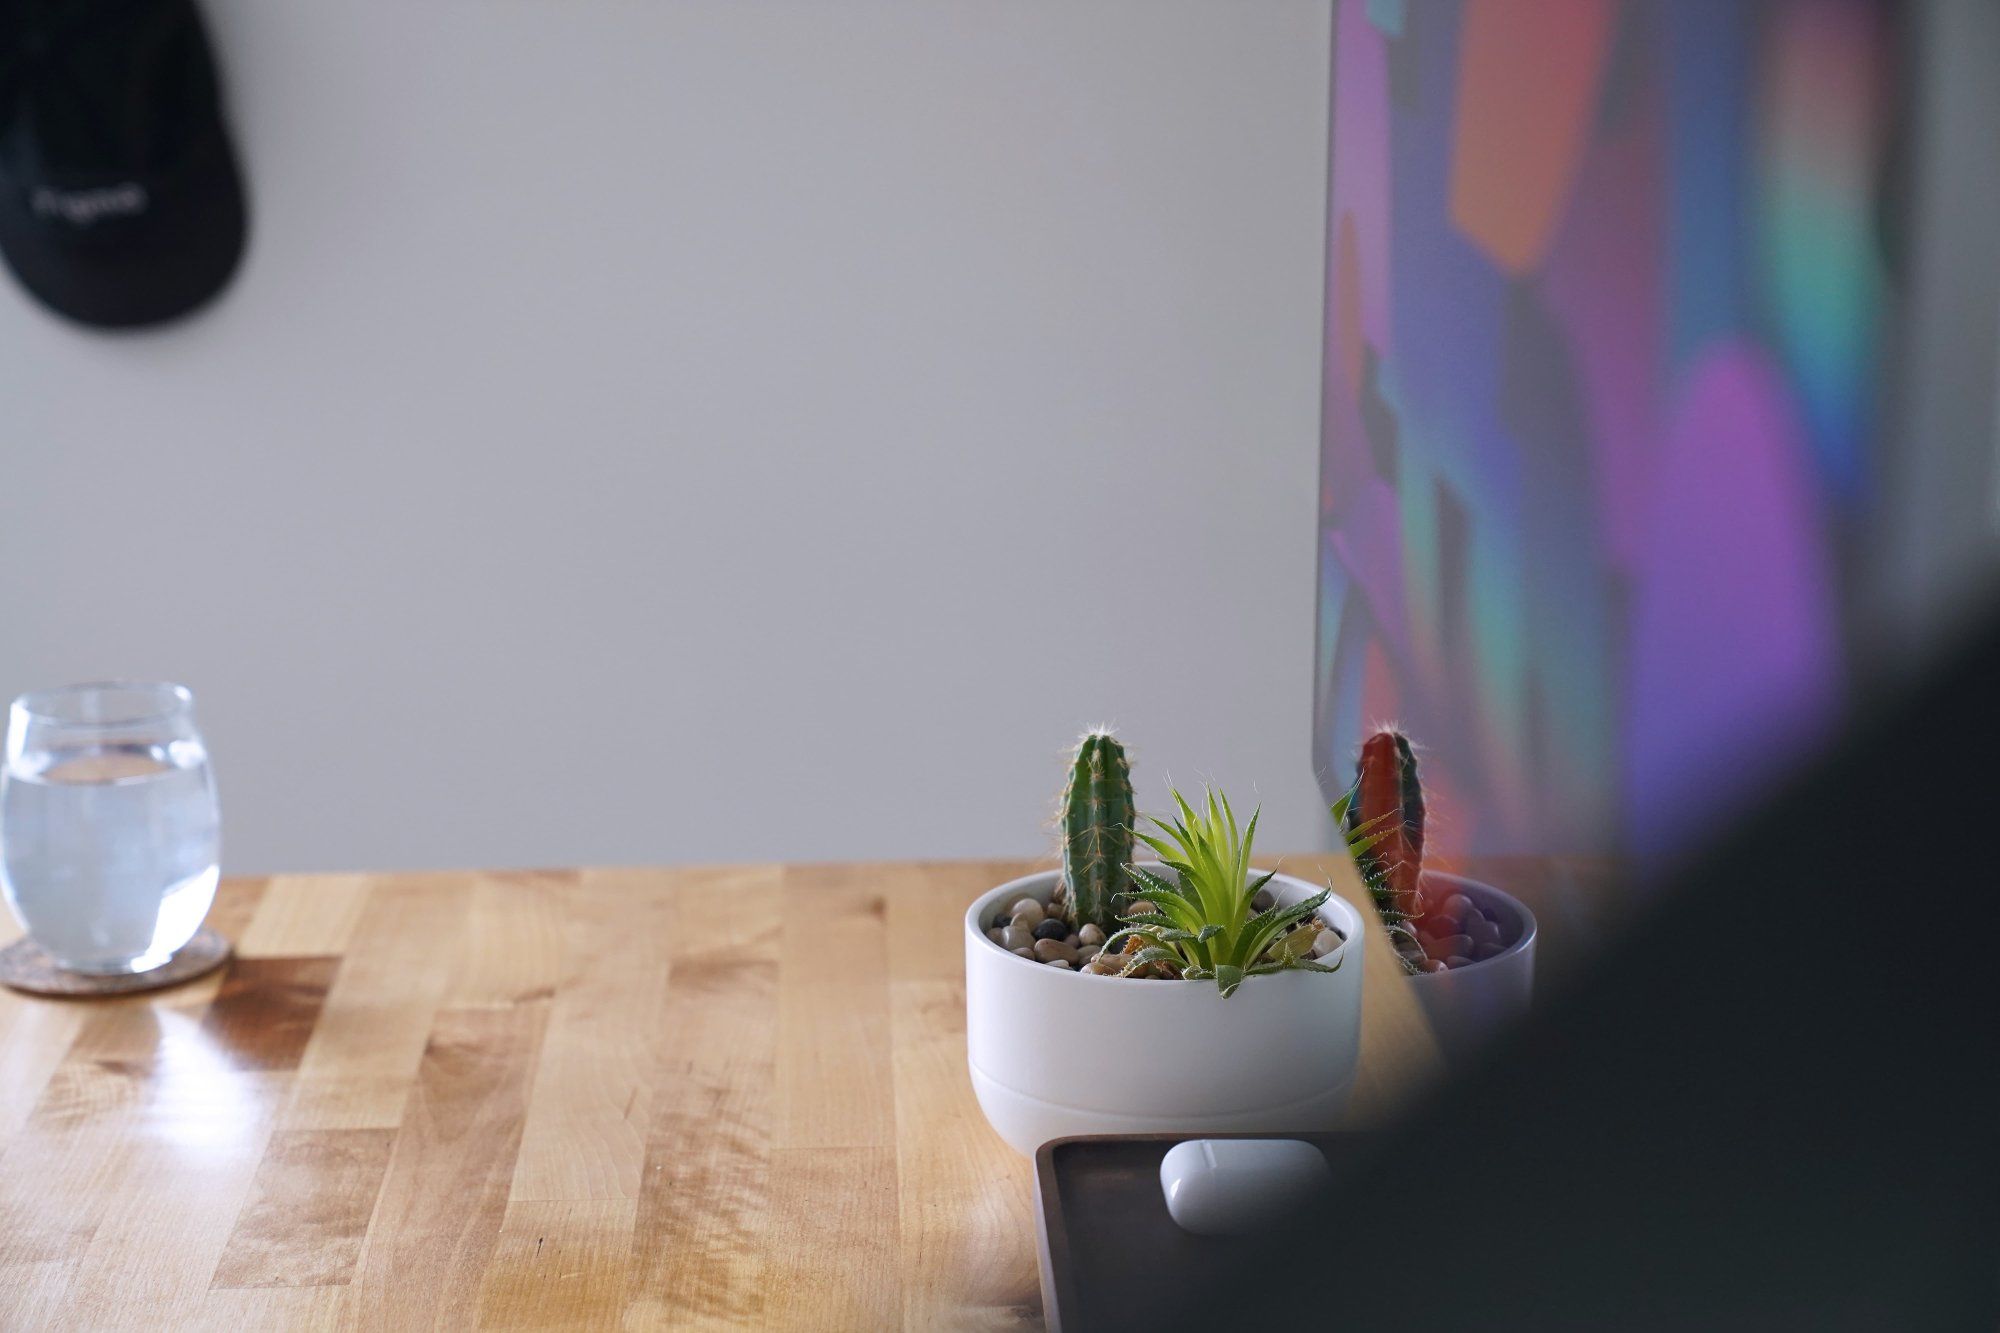 A side view of a minimalist desk setup, which shows a cactus and succulent planter, along with a clear water glass and a monitor